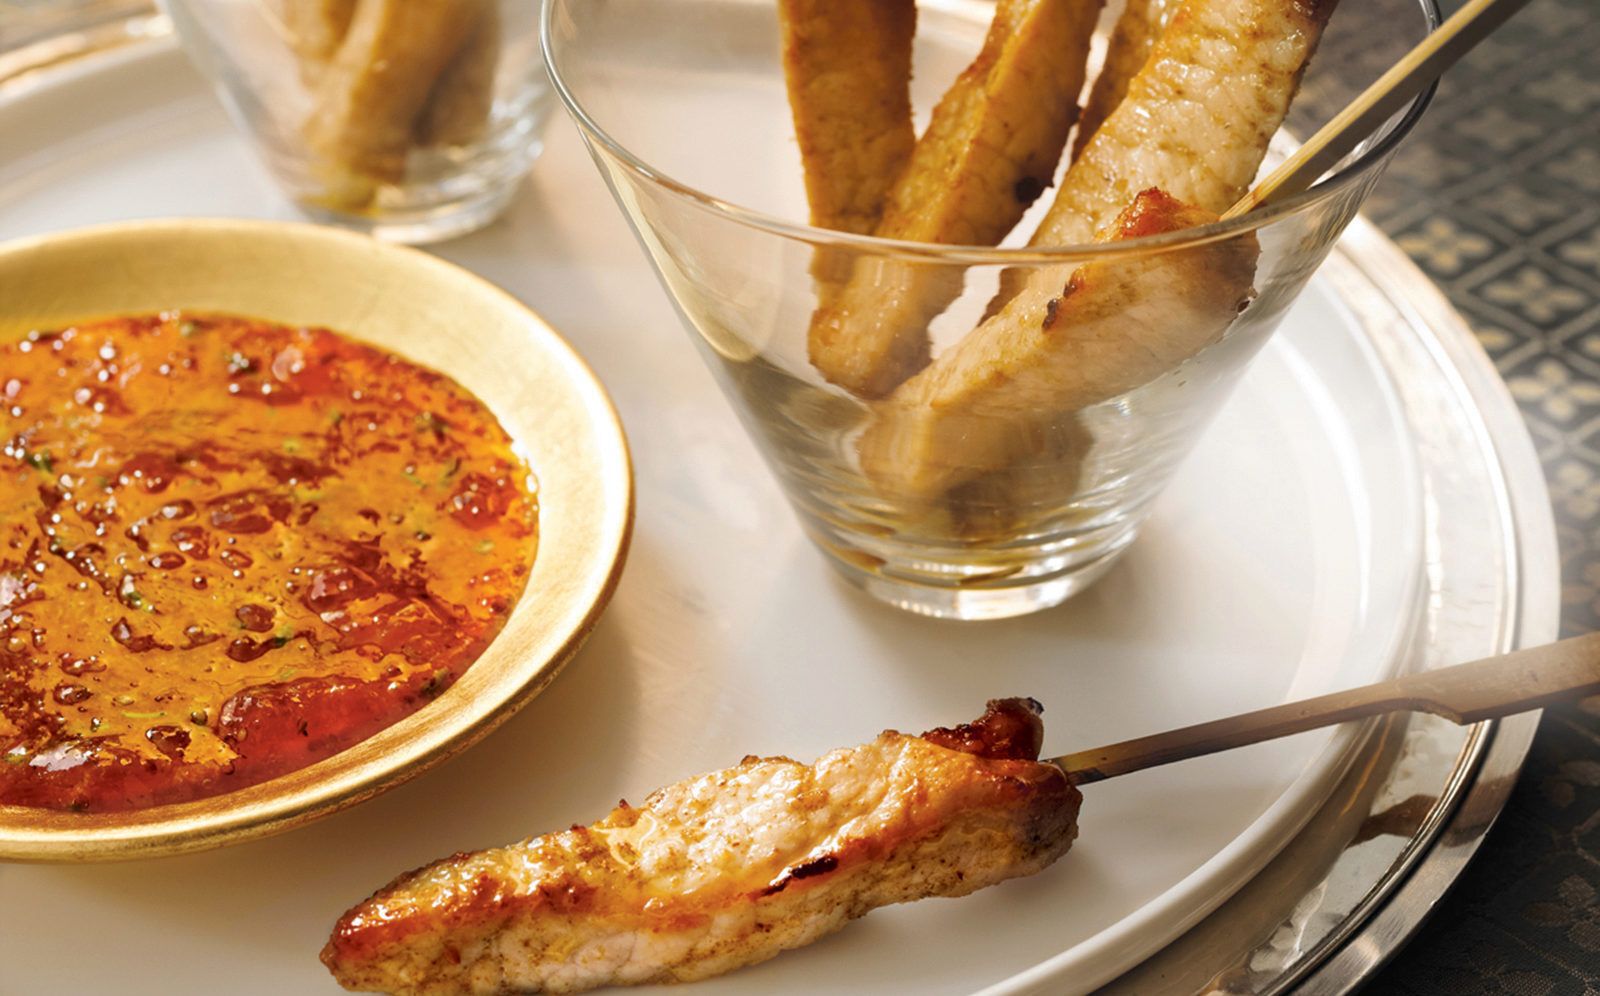 Cumin-Spiced Pork Skewers with Apricot Mustard Dipping Sauce